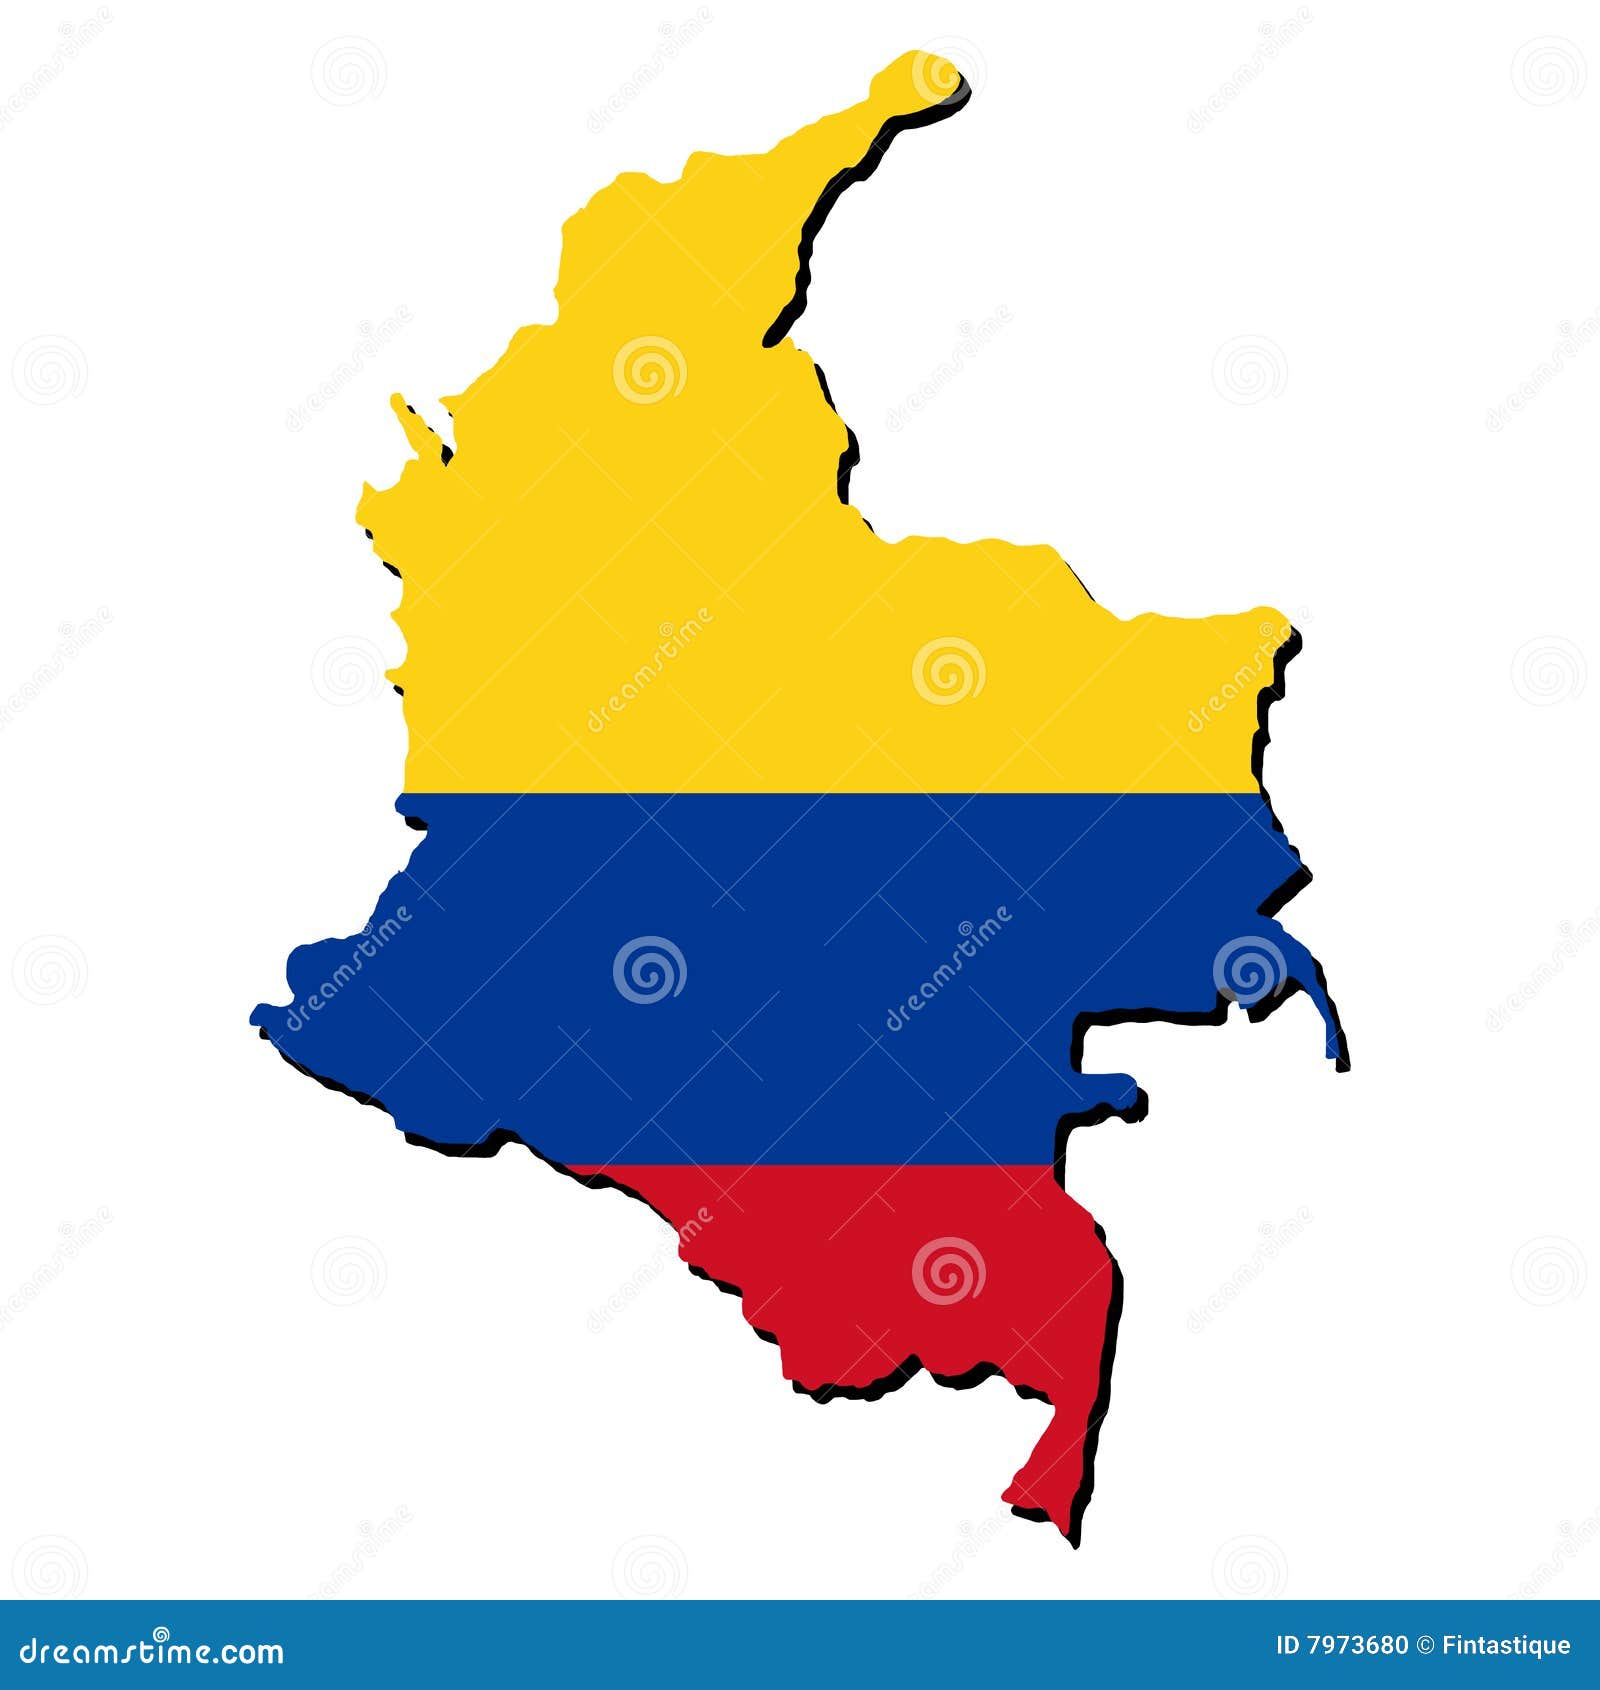 https://thumbs.dreamstime.com/z/map-flag-colombia-7973680.jpg